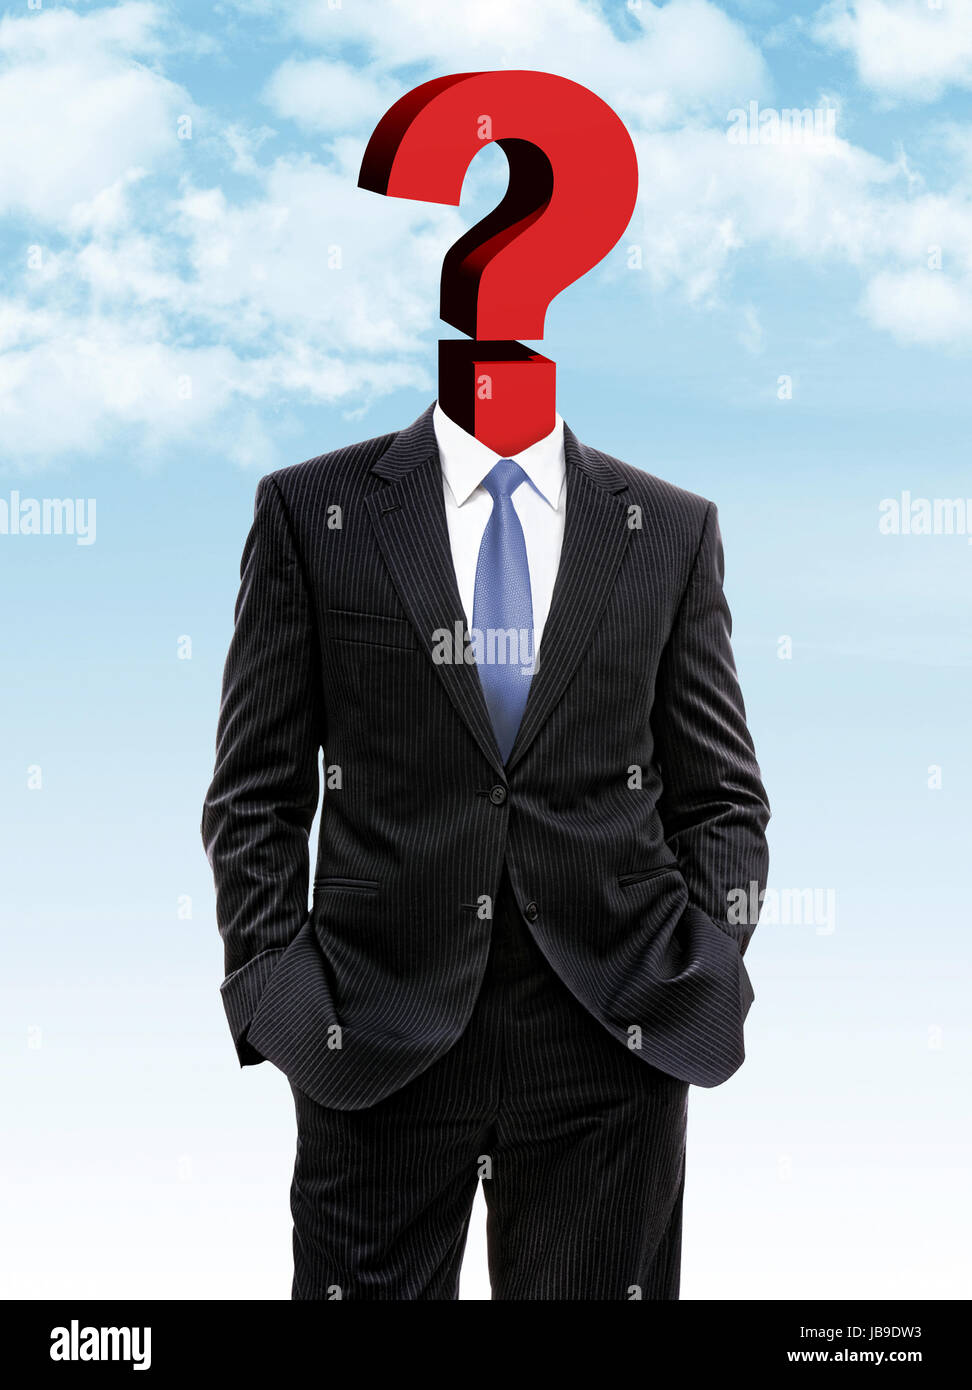 business man with question mark instead of head, 3d illustration Stock Photo